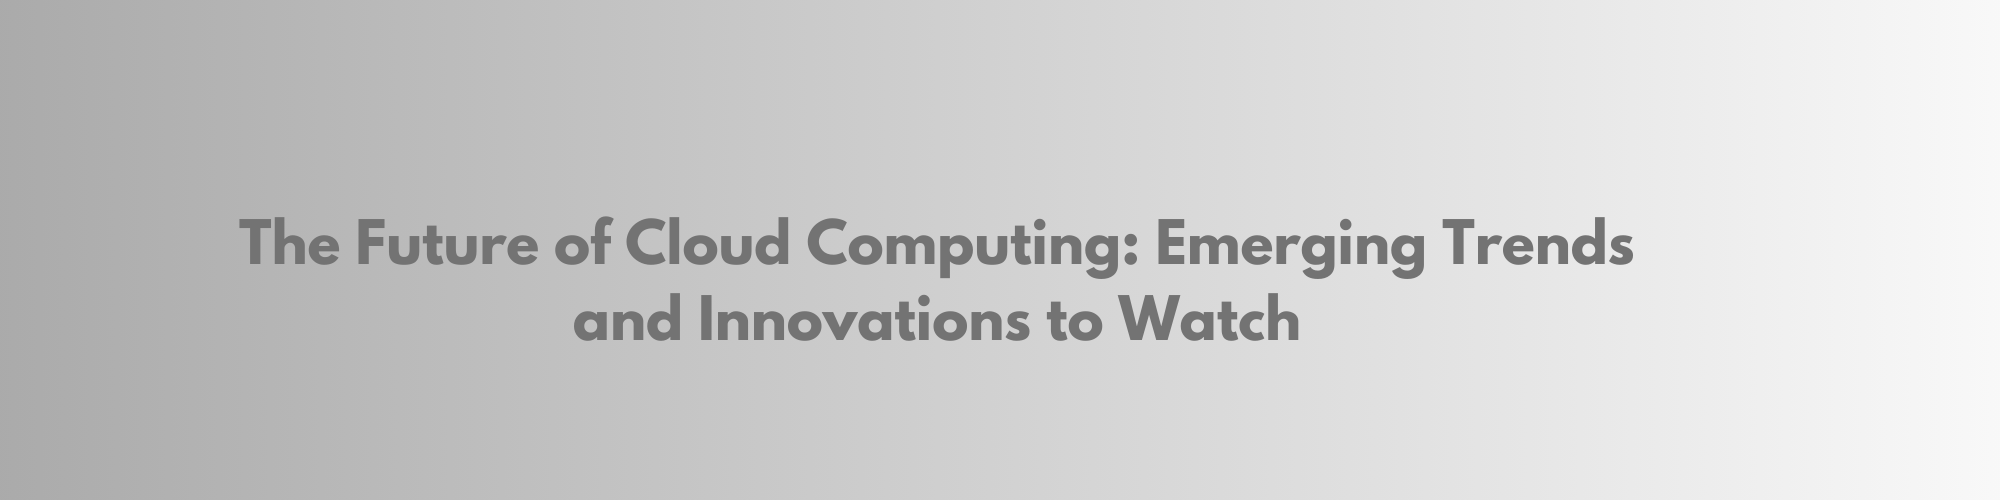 The Future of Cloud Computing: Emerging Trends and Innovations to Watch